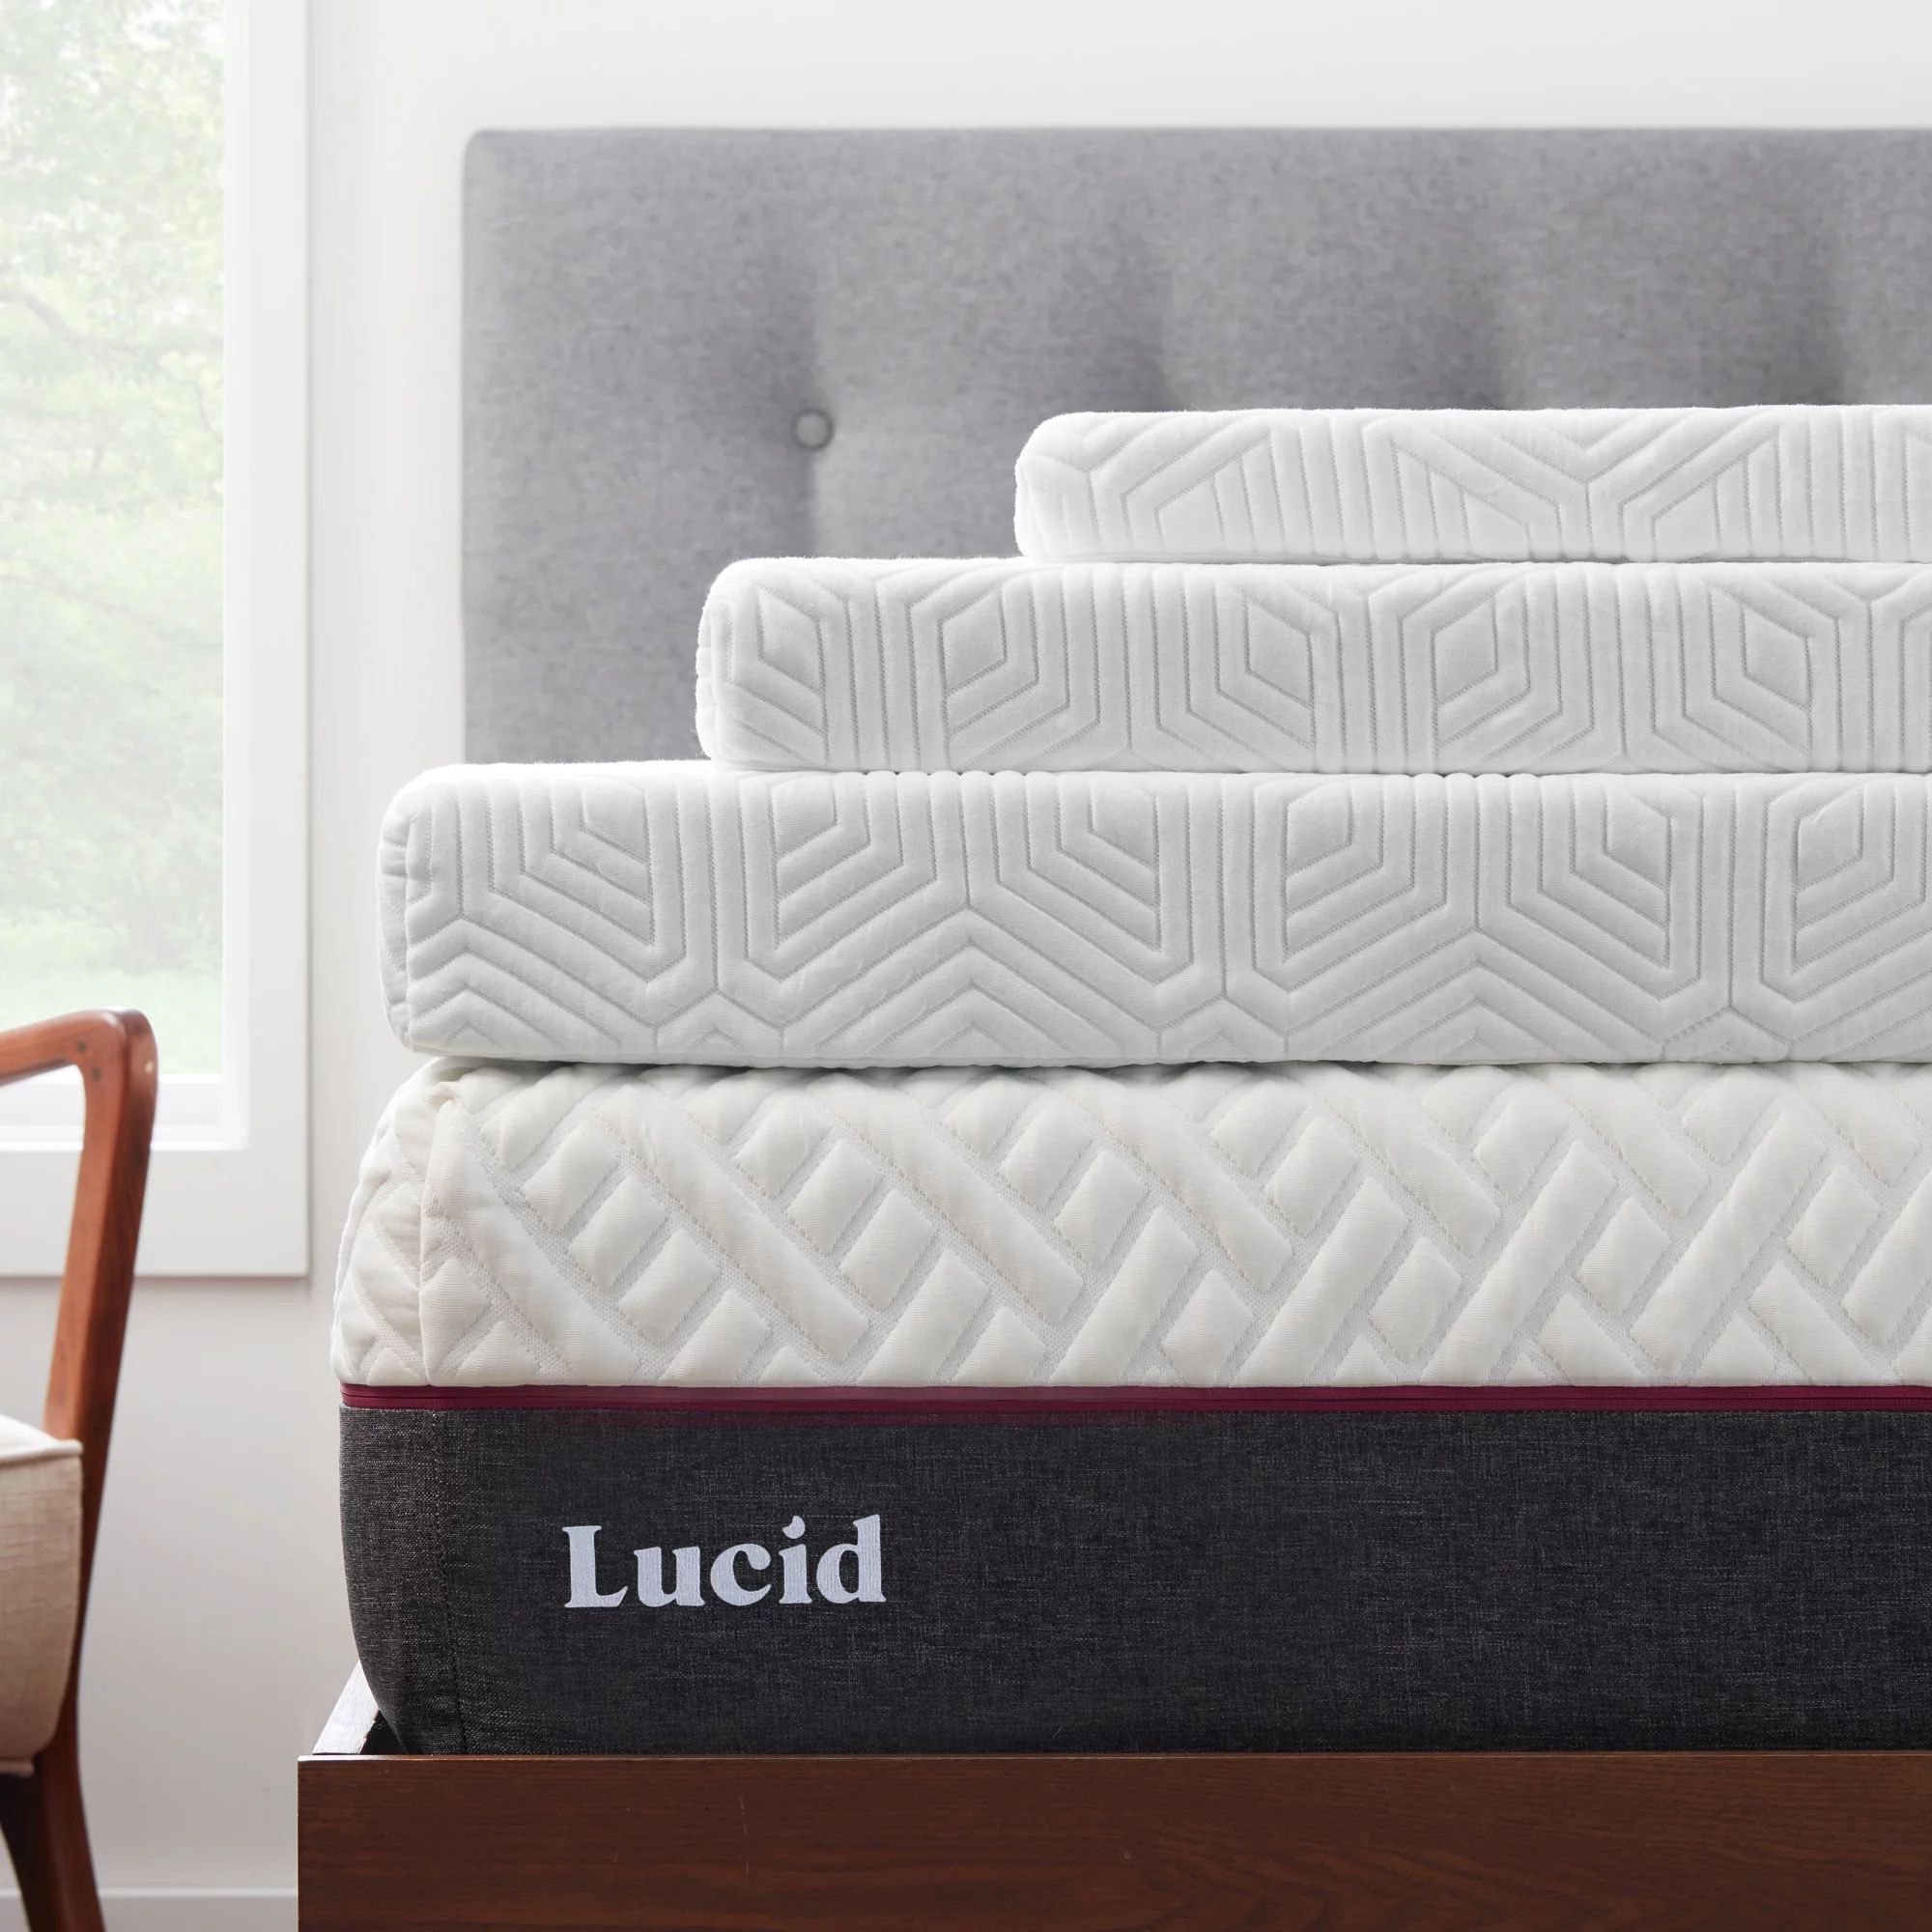 Lucid 2" Cooling Gel Plush Memory Foam Mattress Topper with Cover, Queen | Walmart (US)